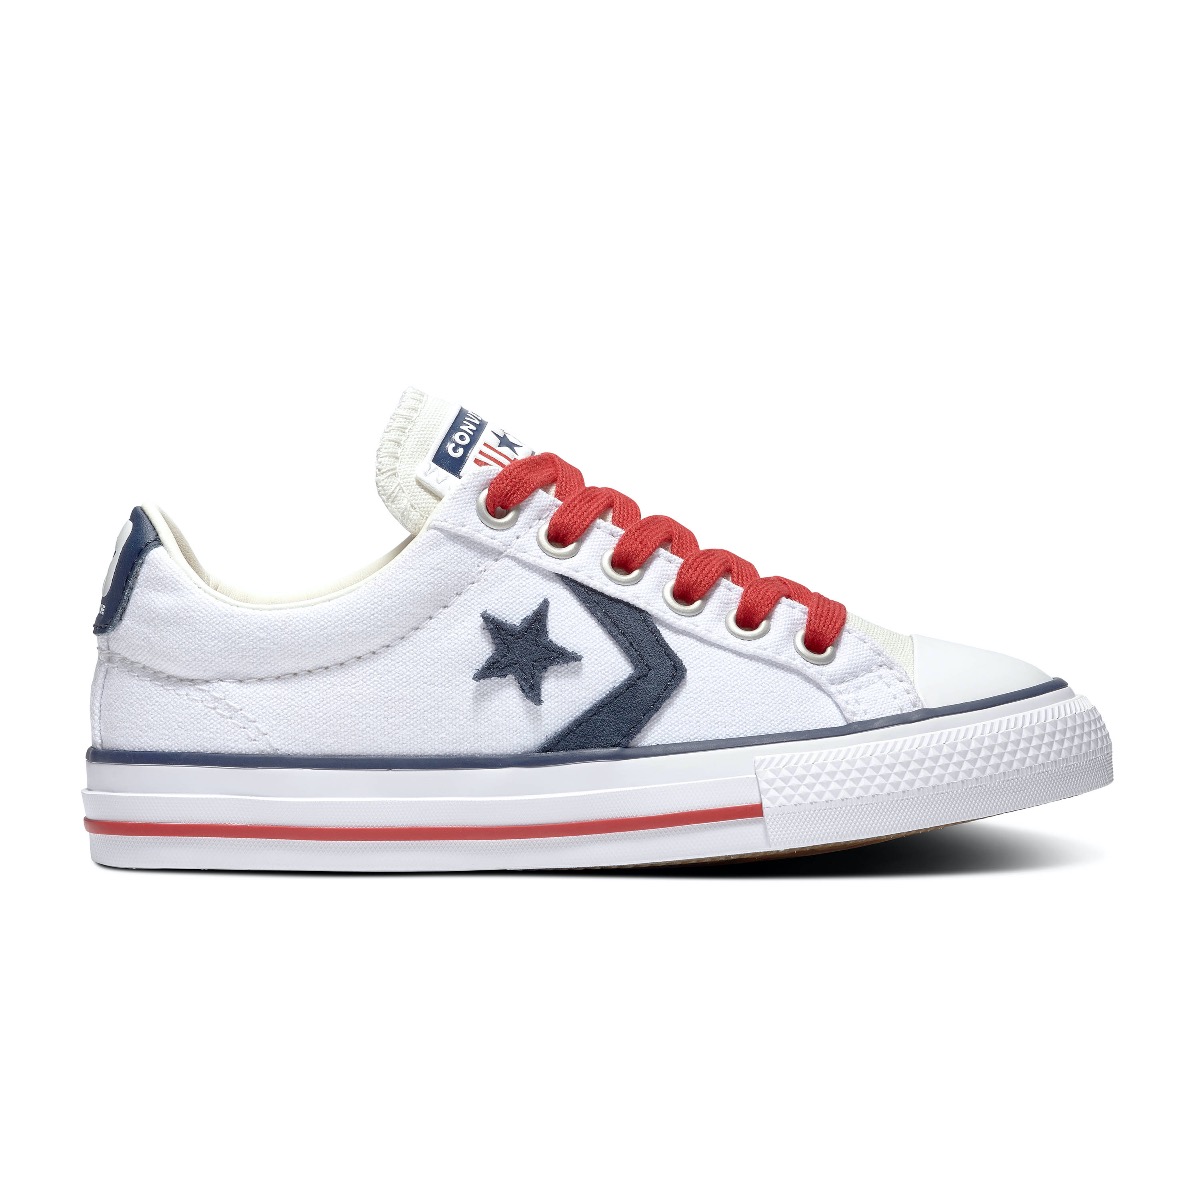 Converse All Stars Star Player 668013C Wit Rood Blauw 35